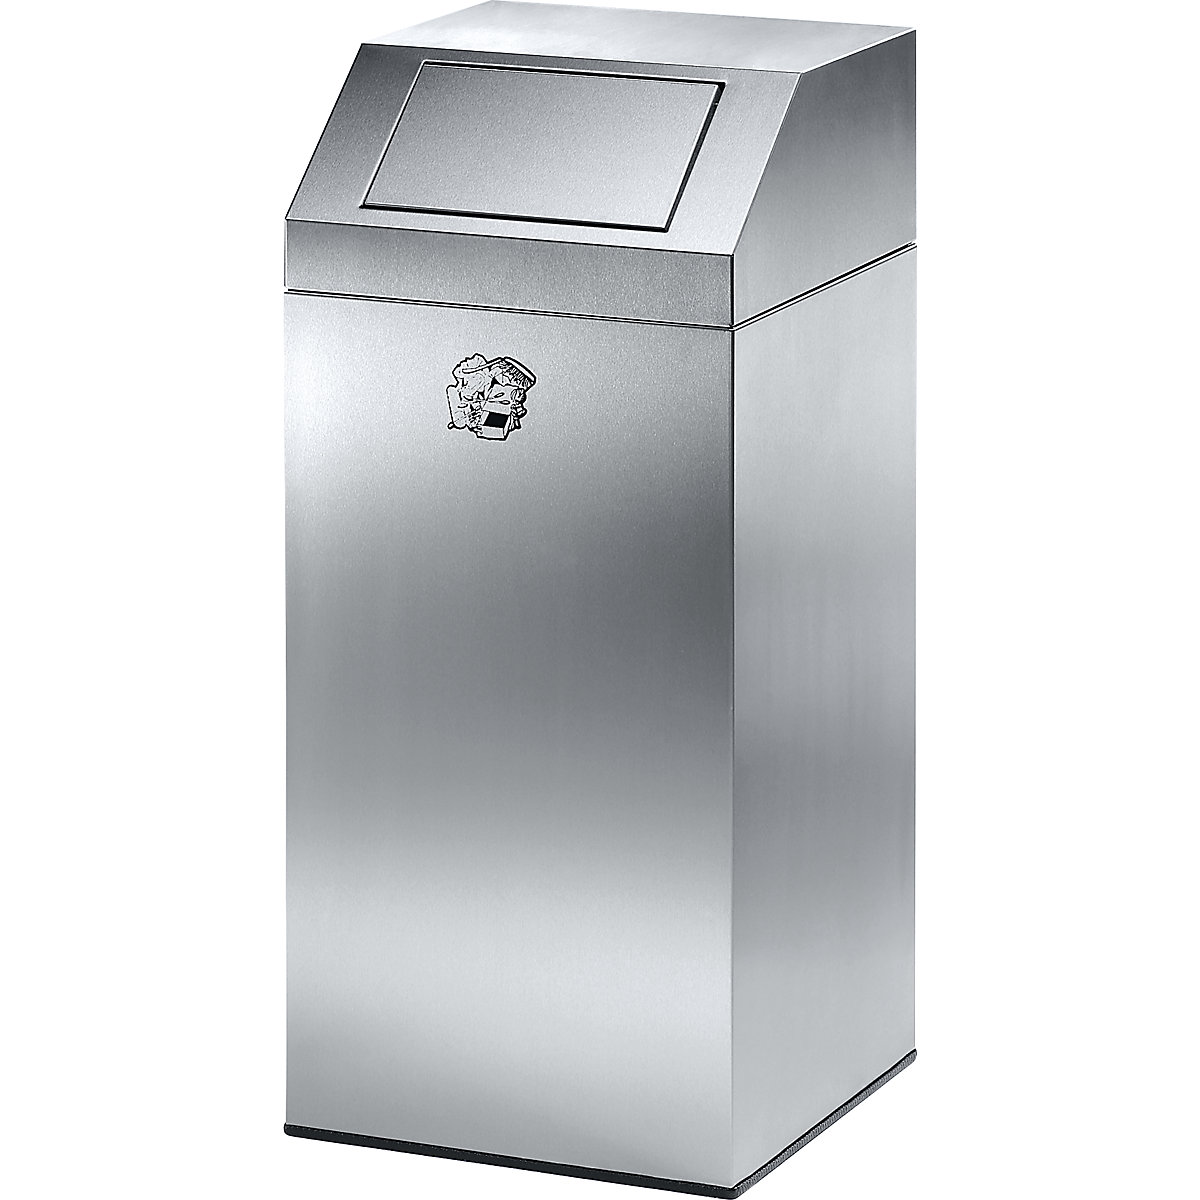 Stainless steel waste collector, for indoor and outdoor use – VAR